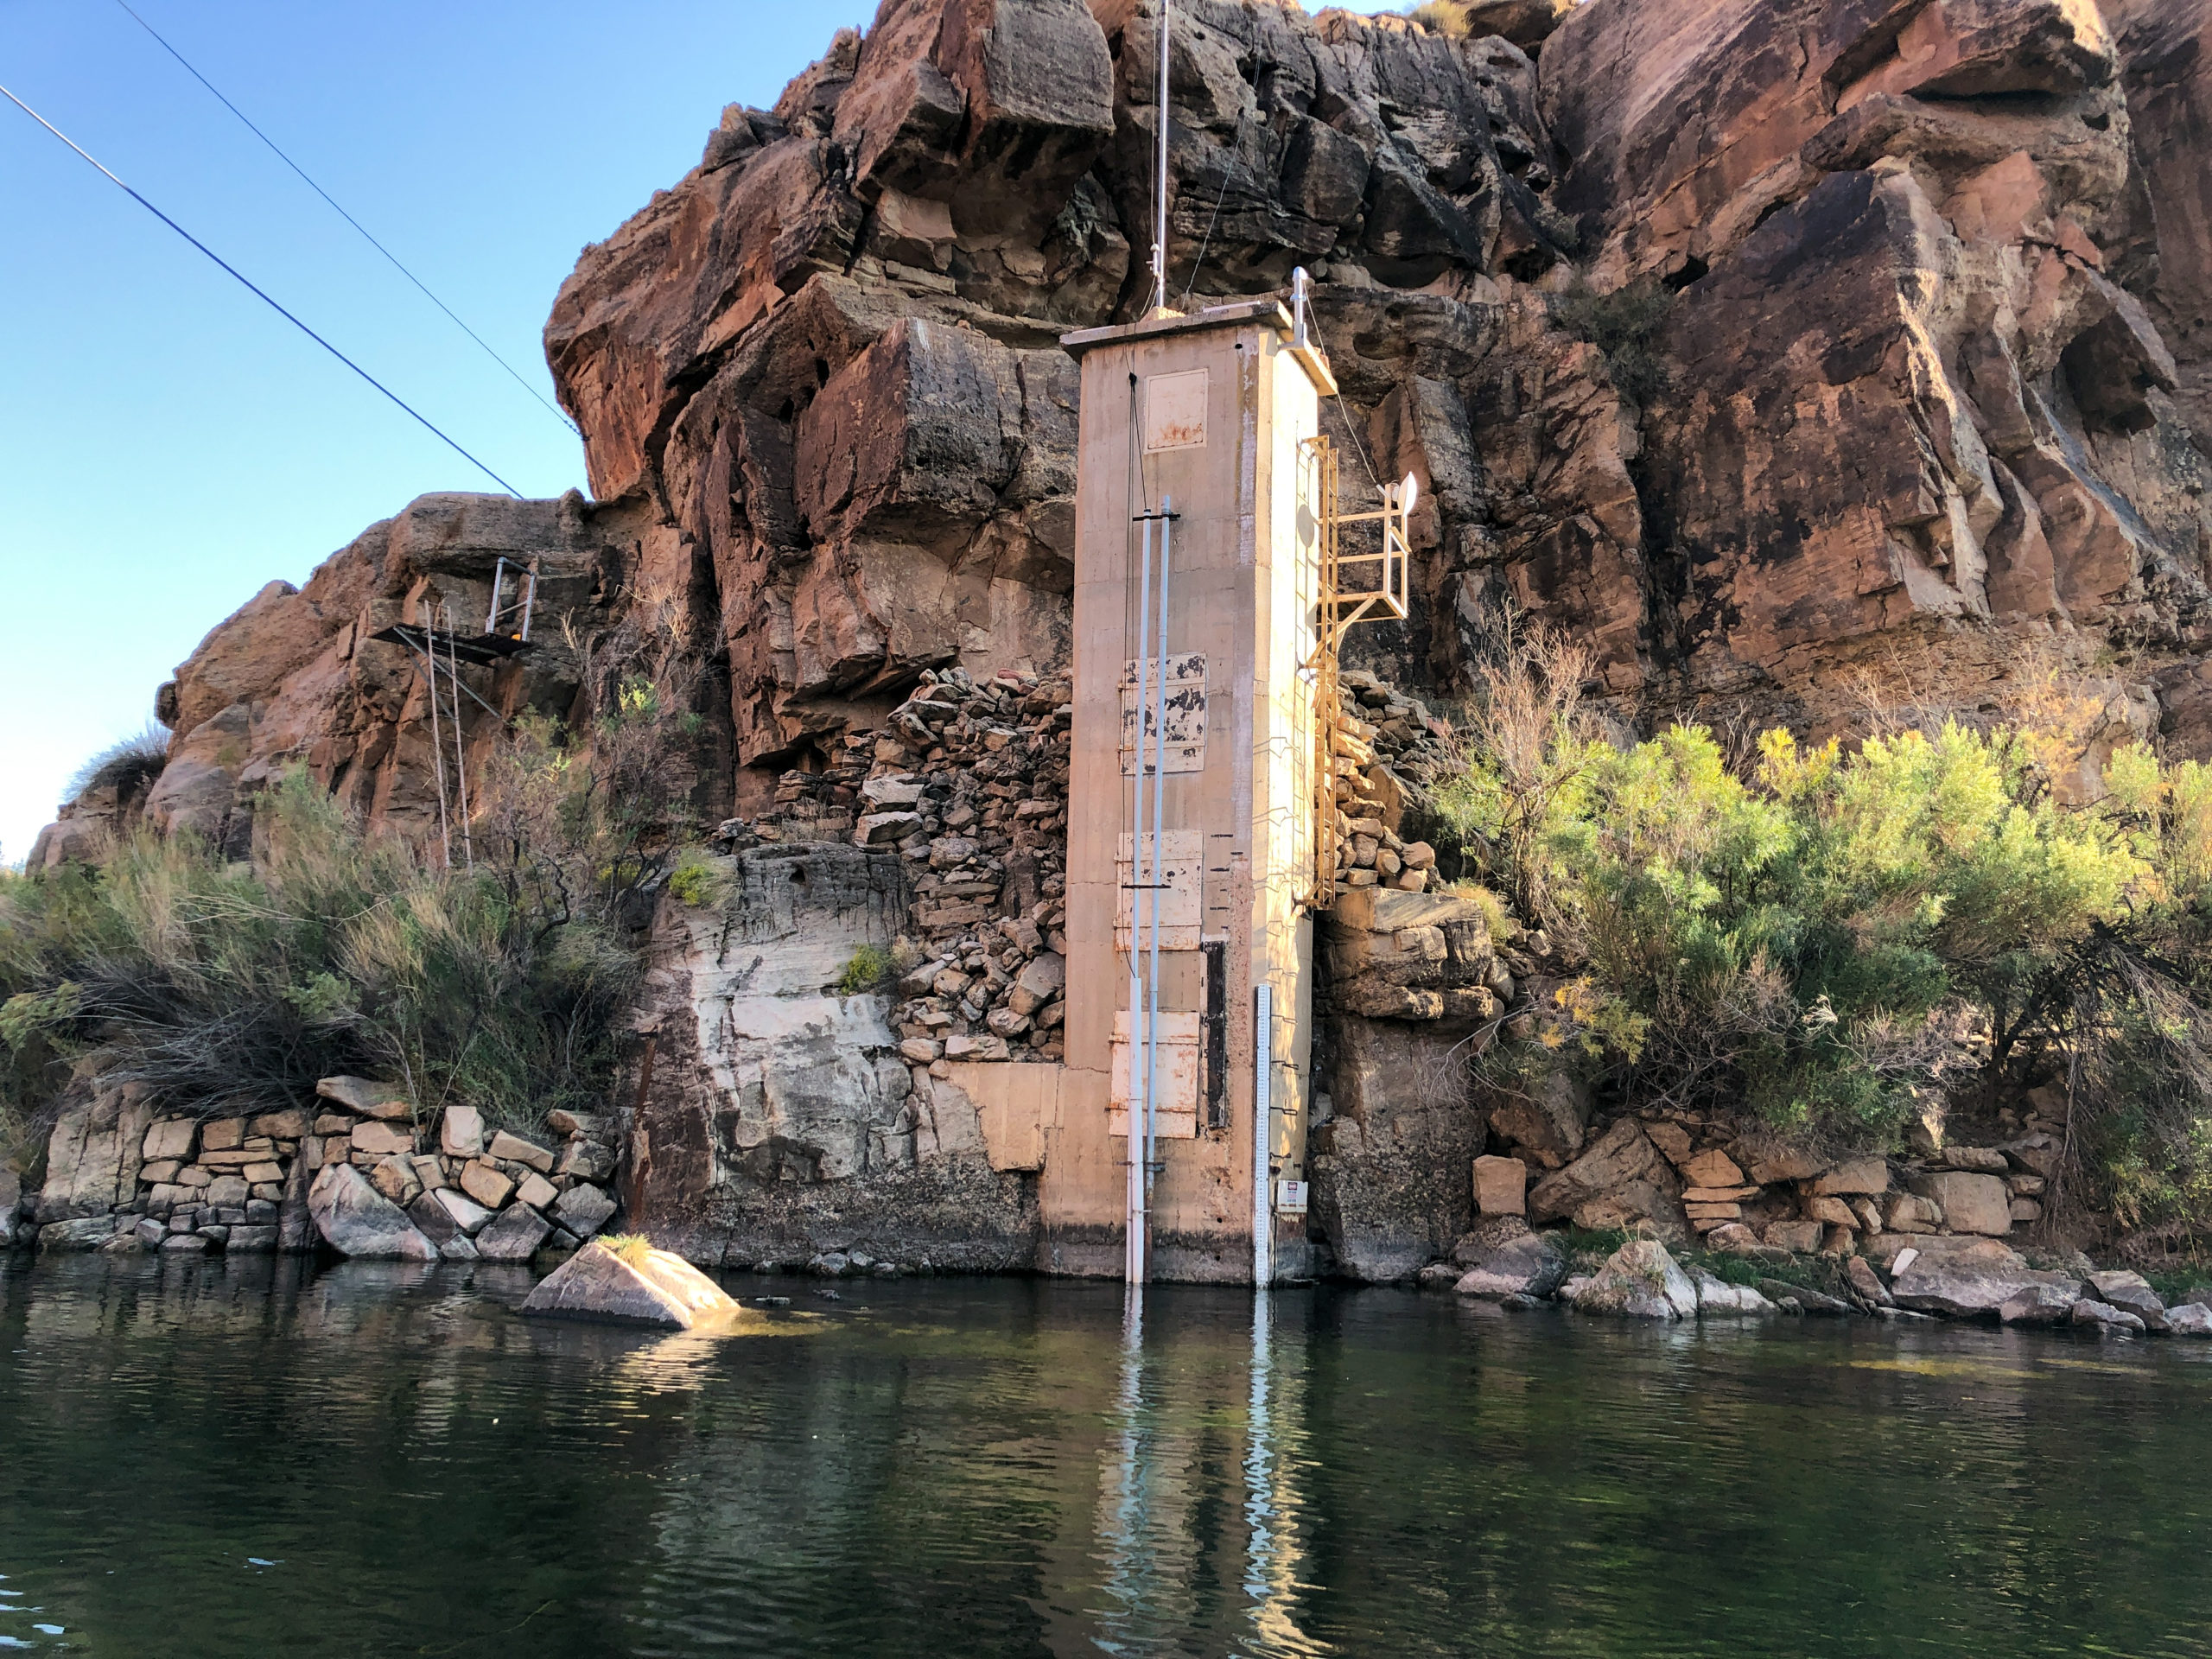 This is the Lees Ferry gauging station located on the Colorado River 15 miles downstream from Glen Canyon Dam. The gauge is used to measure the amount of water flowing down the Colorado River from the Upper Basin to the Lower Basin. Photo credit: Denver Water.